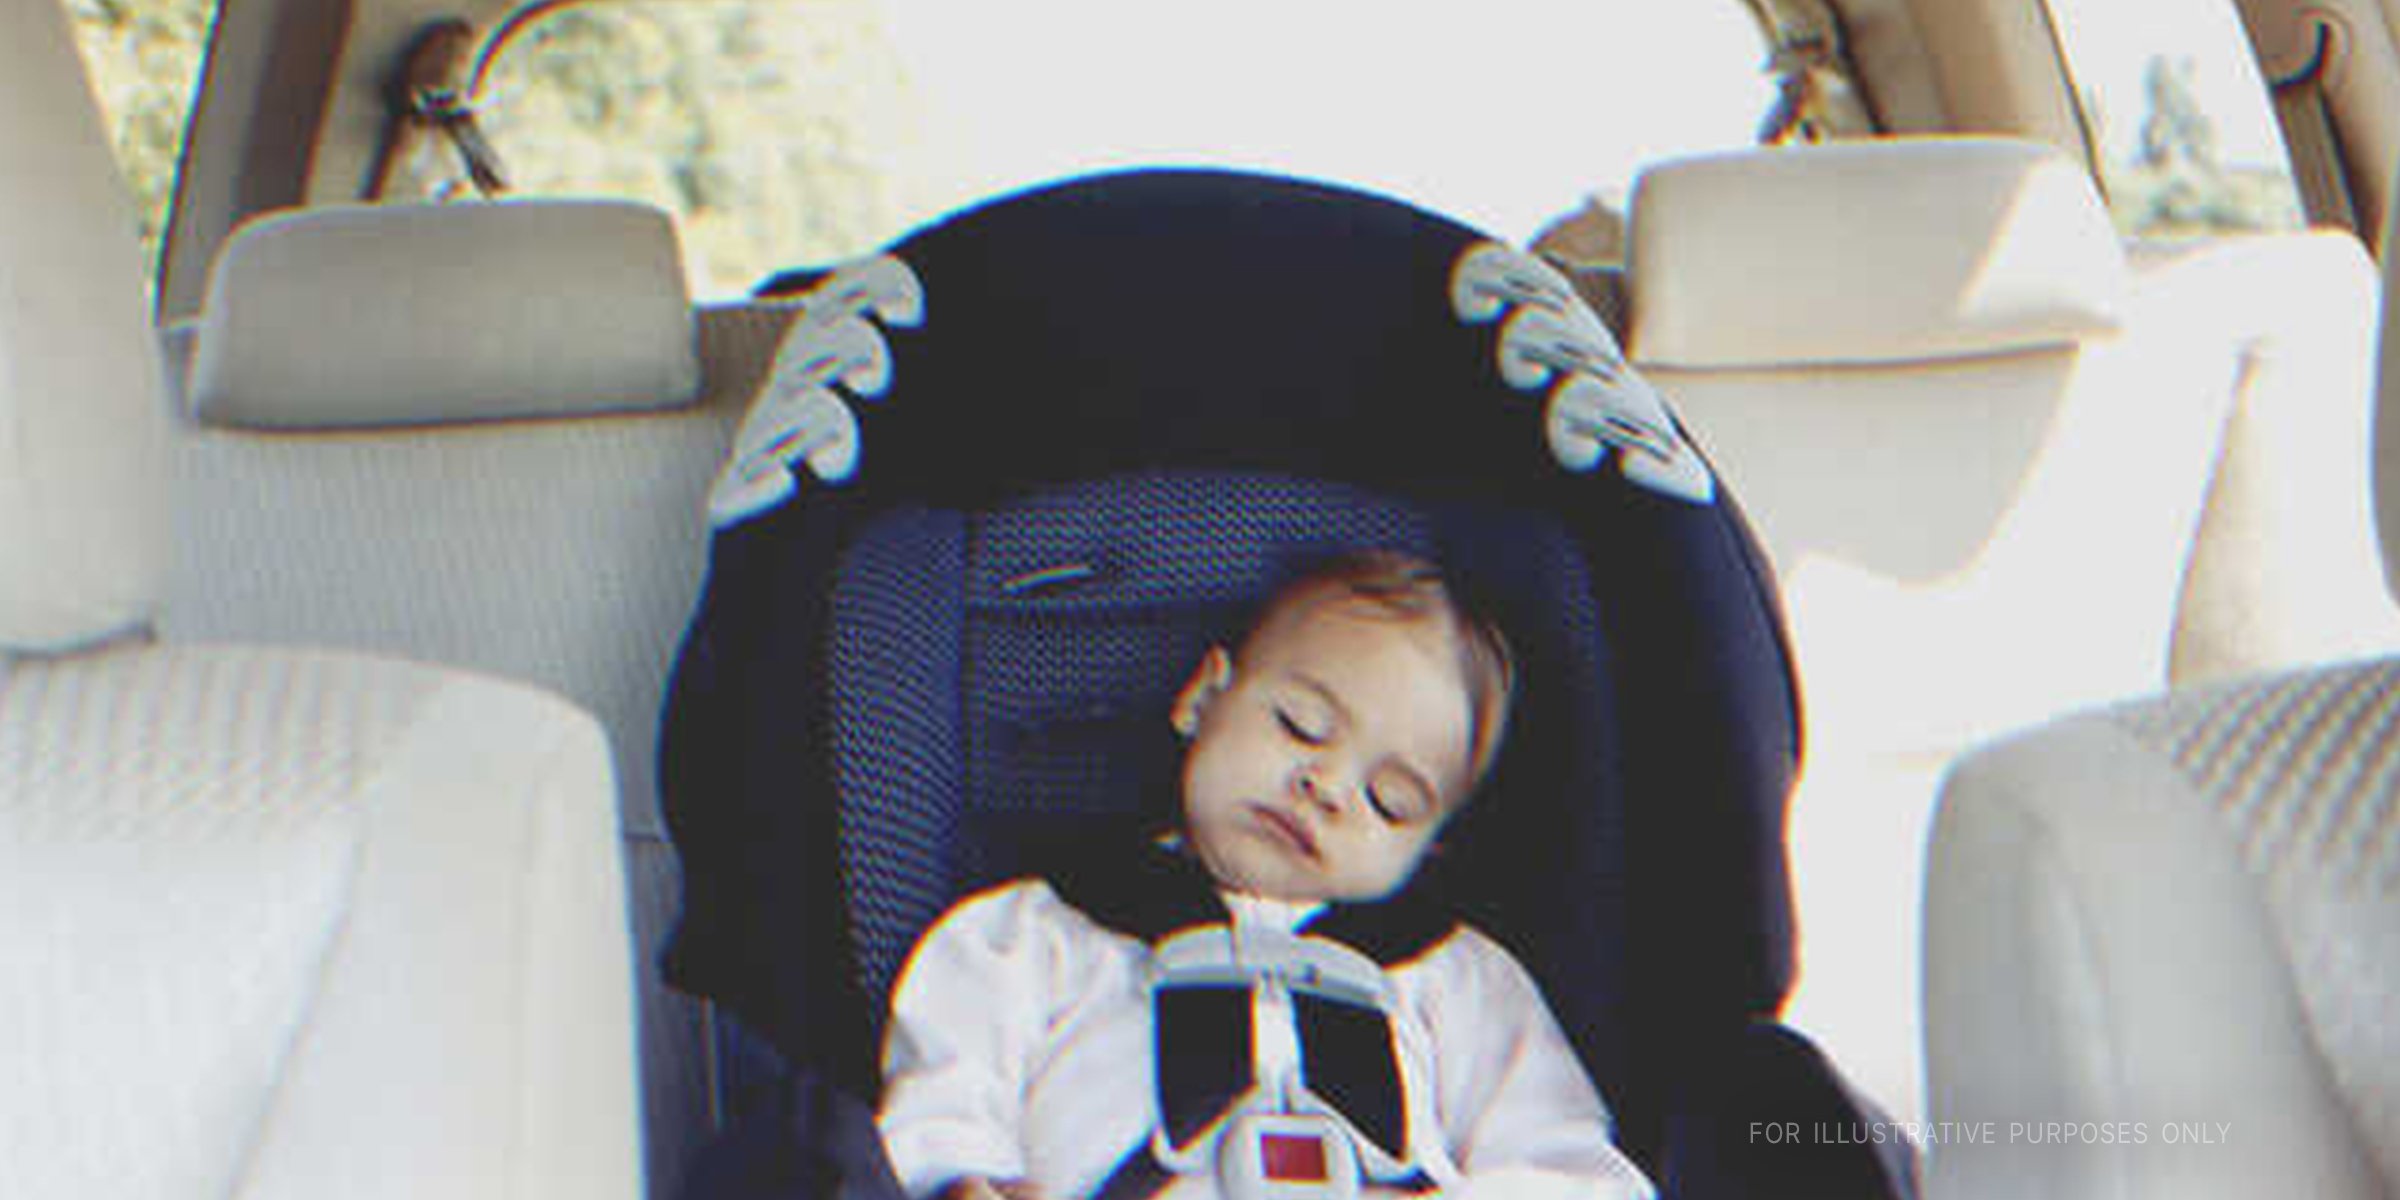 Baby fast asleep in a car's backseat | Source: Getty Images 